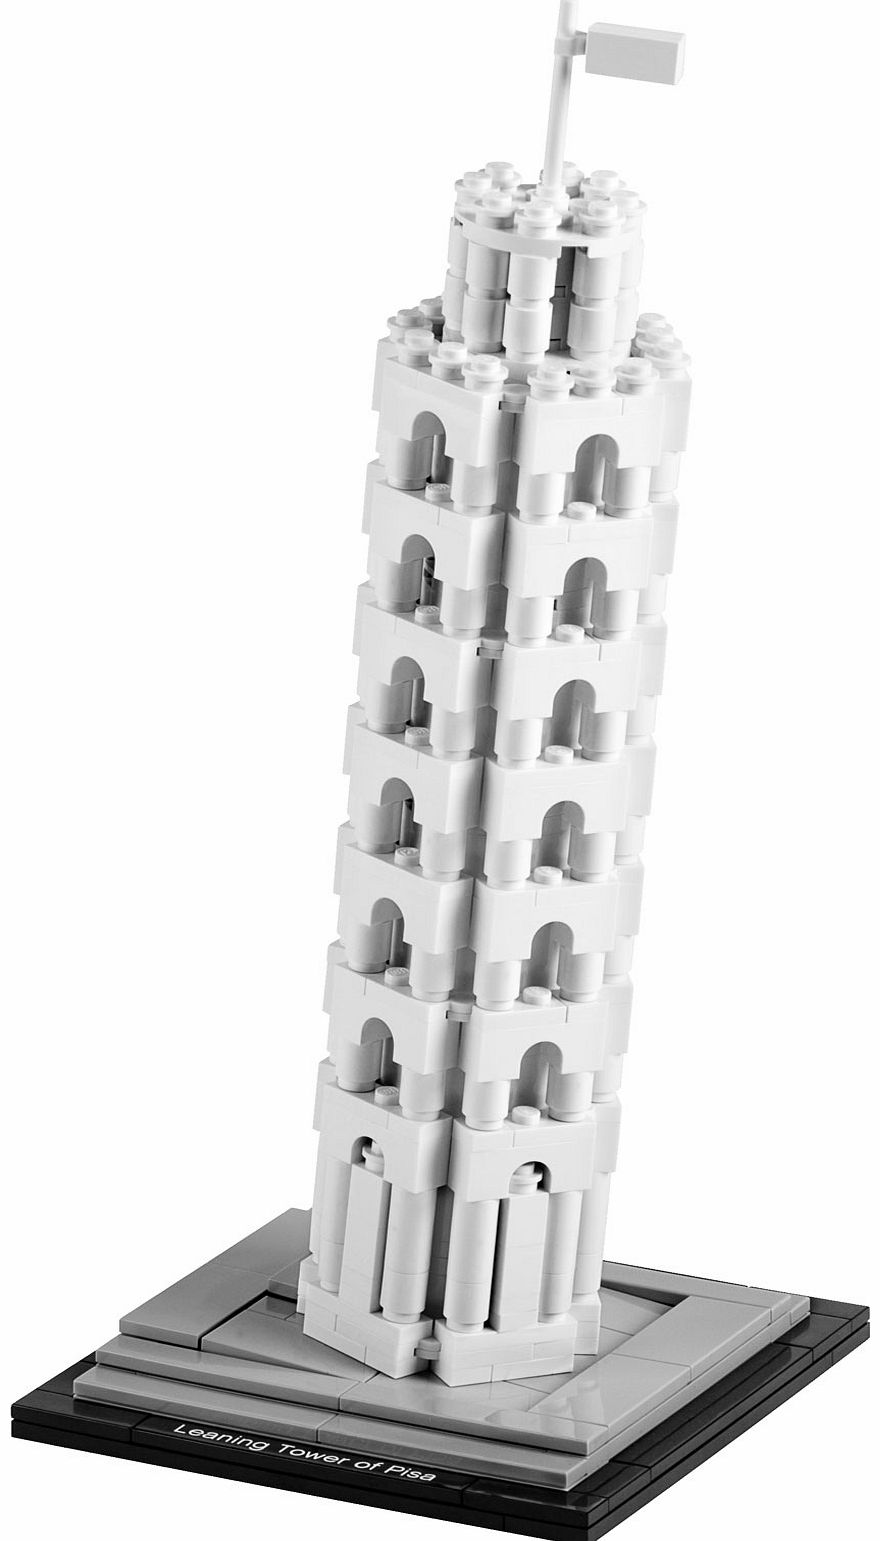 Lego Architecture Leaning Tower of Pisa 21015